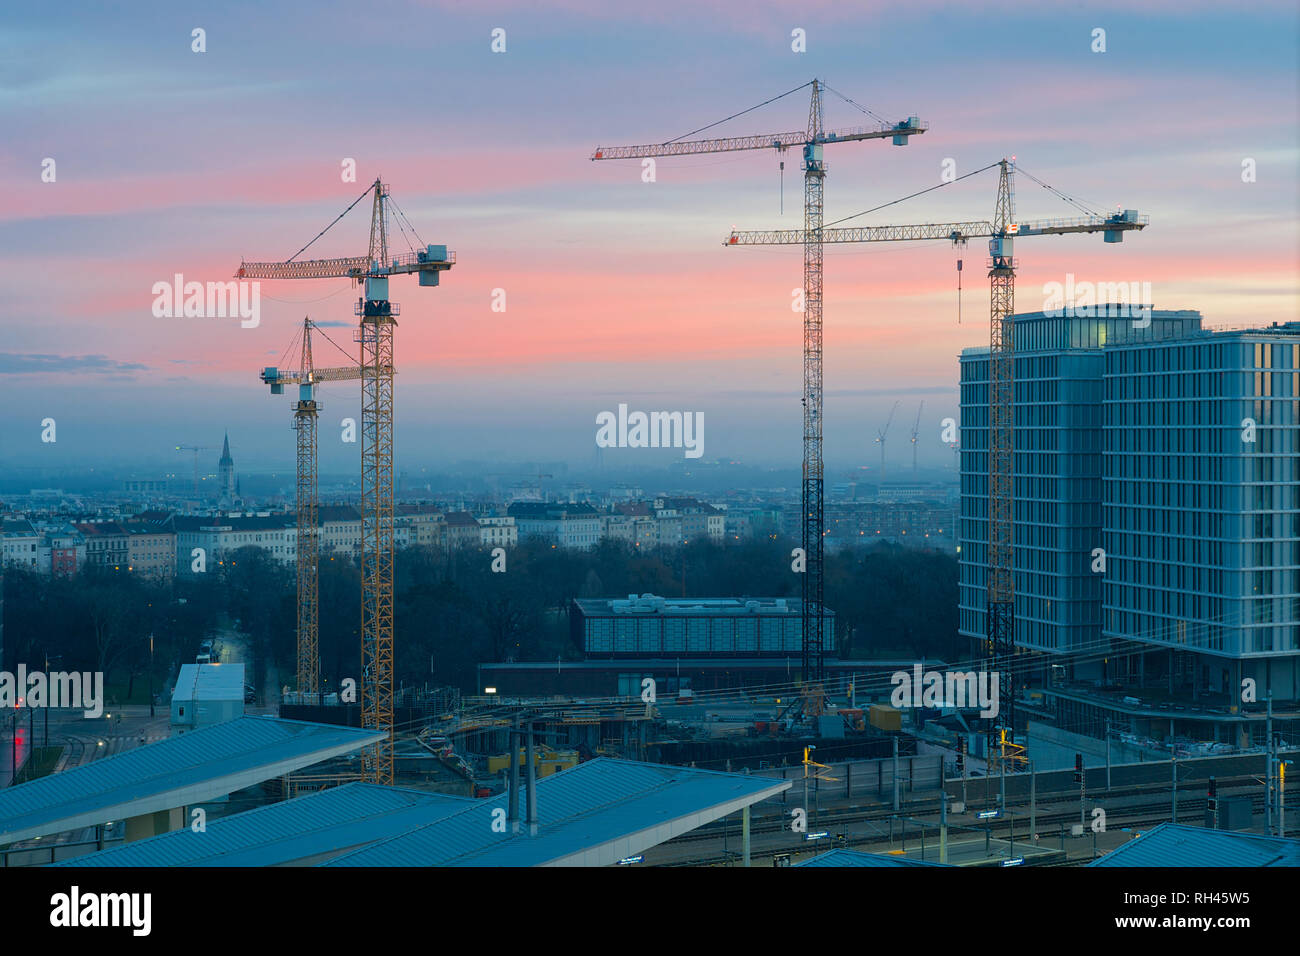 Four Construction Cranes in early morning light with the Skyline of Vienna with a dramatic sky with orange, blue and pink hues. Stock Photo